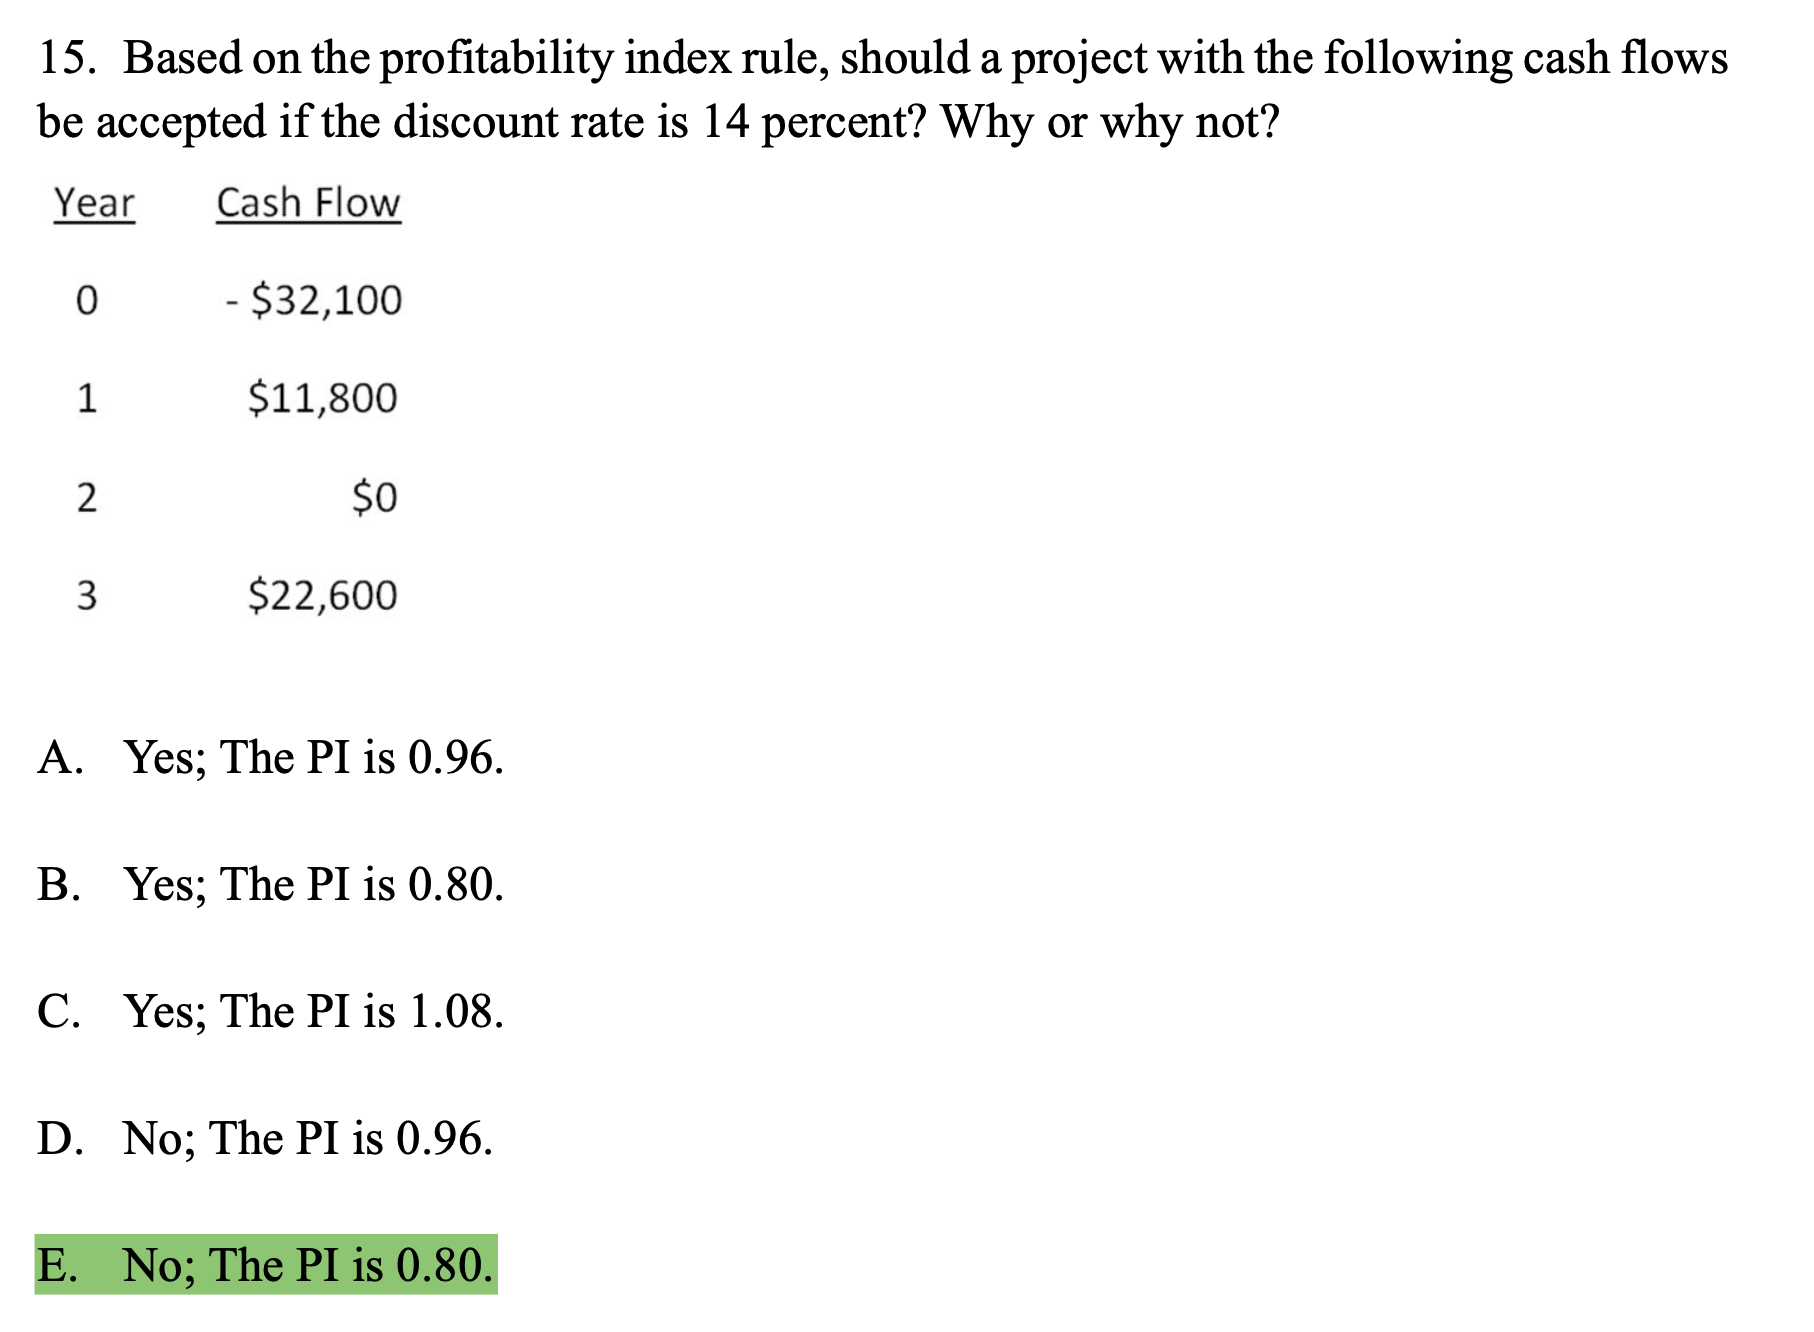 15. Based on the profitability index rule, should a project with the following cash flows be accepted if the